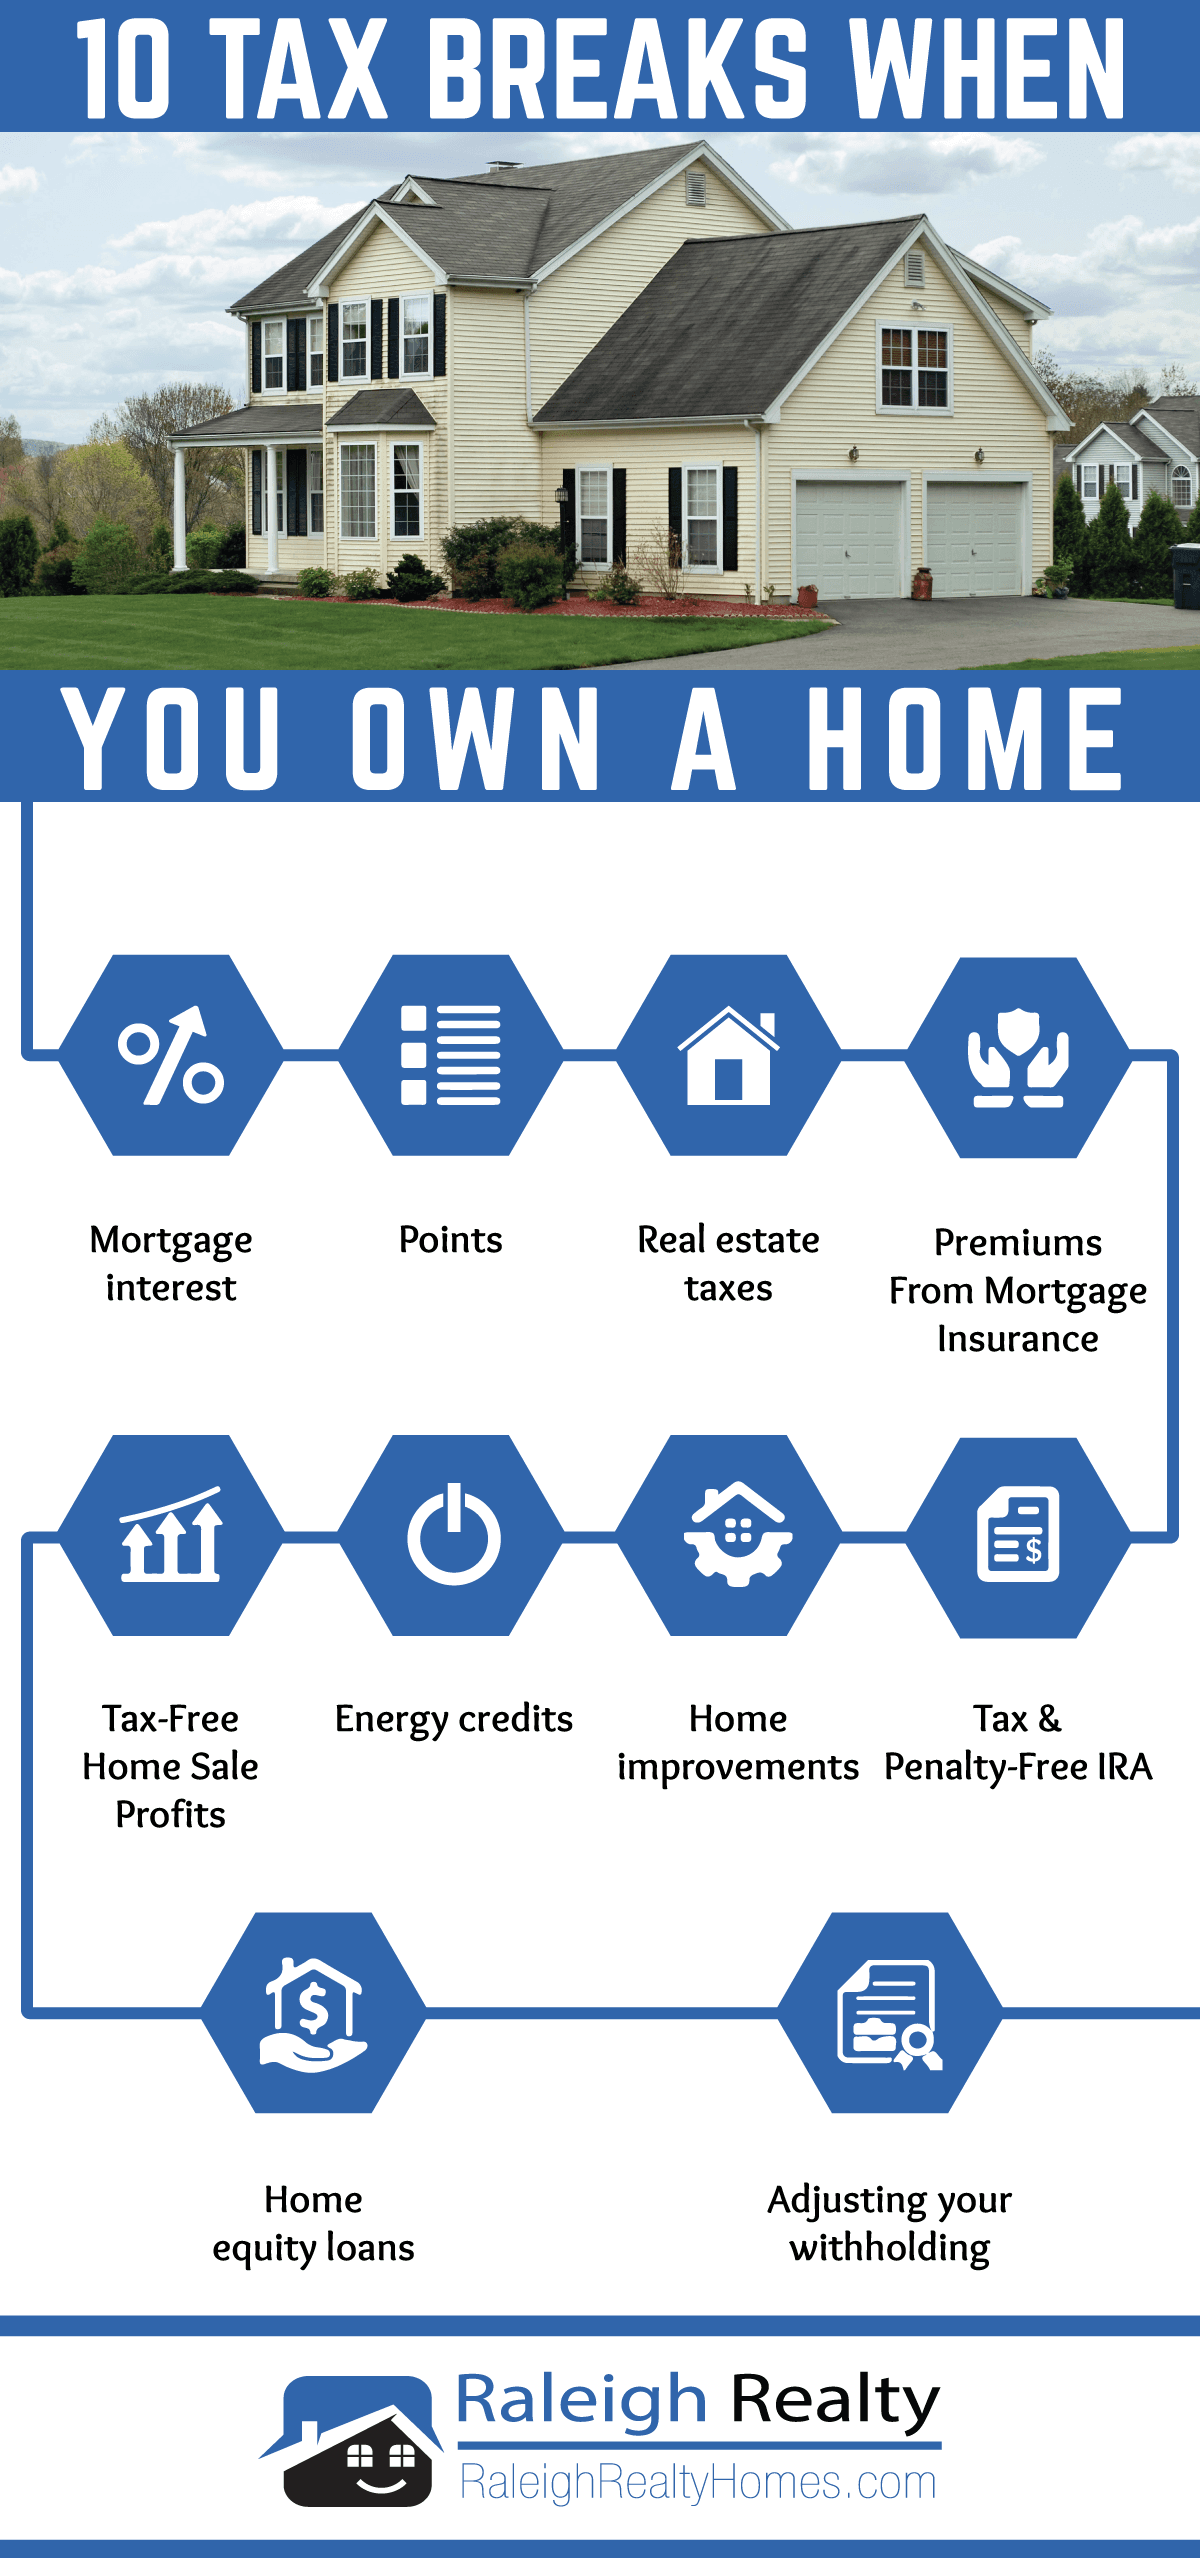 10 Tax Breaks When You Own A Home Infographic